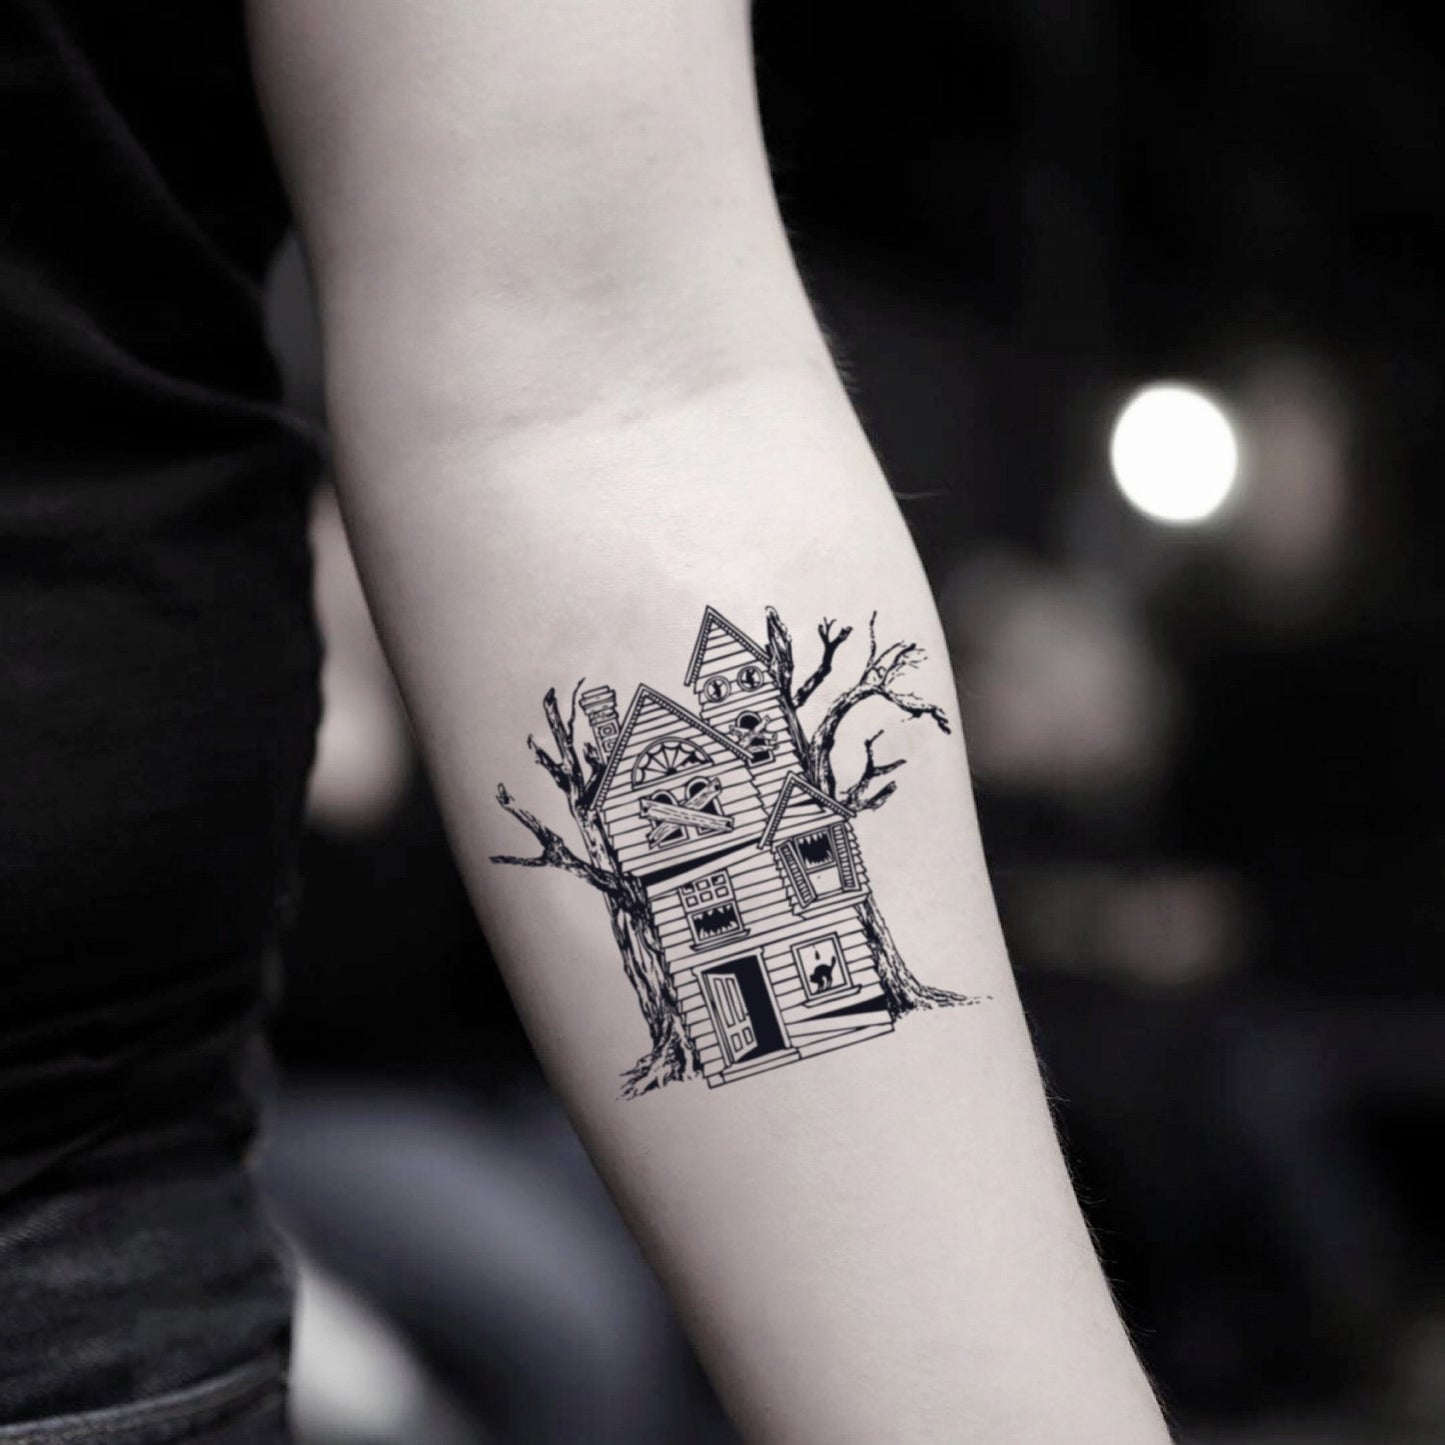 fake small haunted witch house mansion illustrative temporary tattoo sticker design idea on inner arm